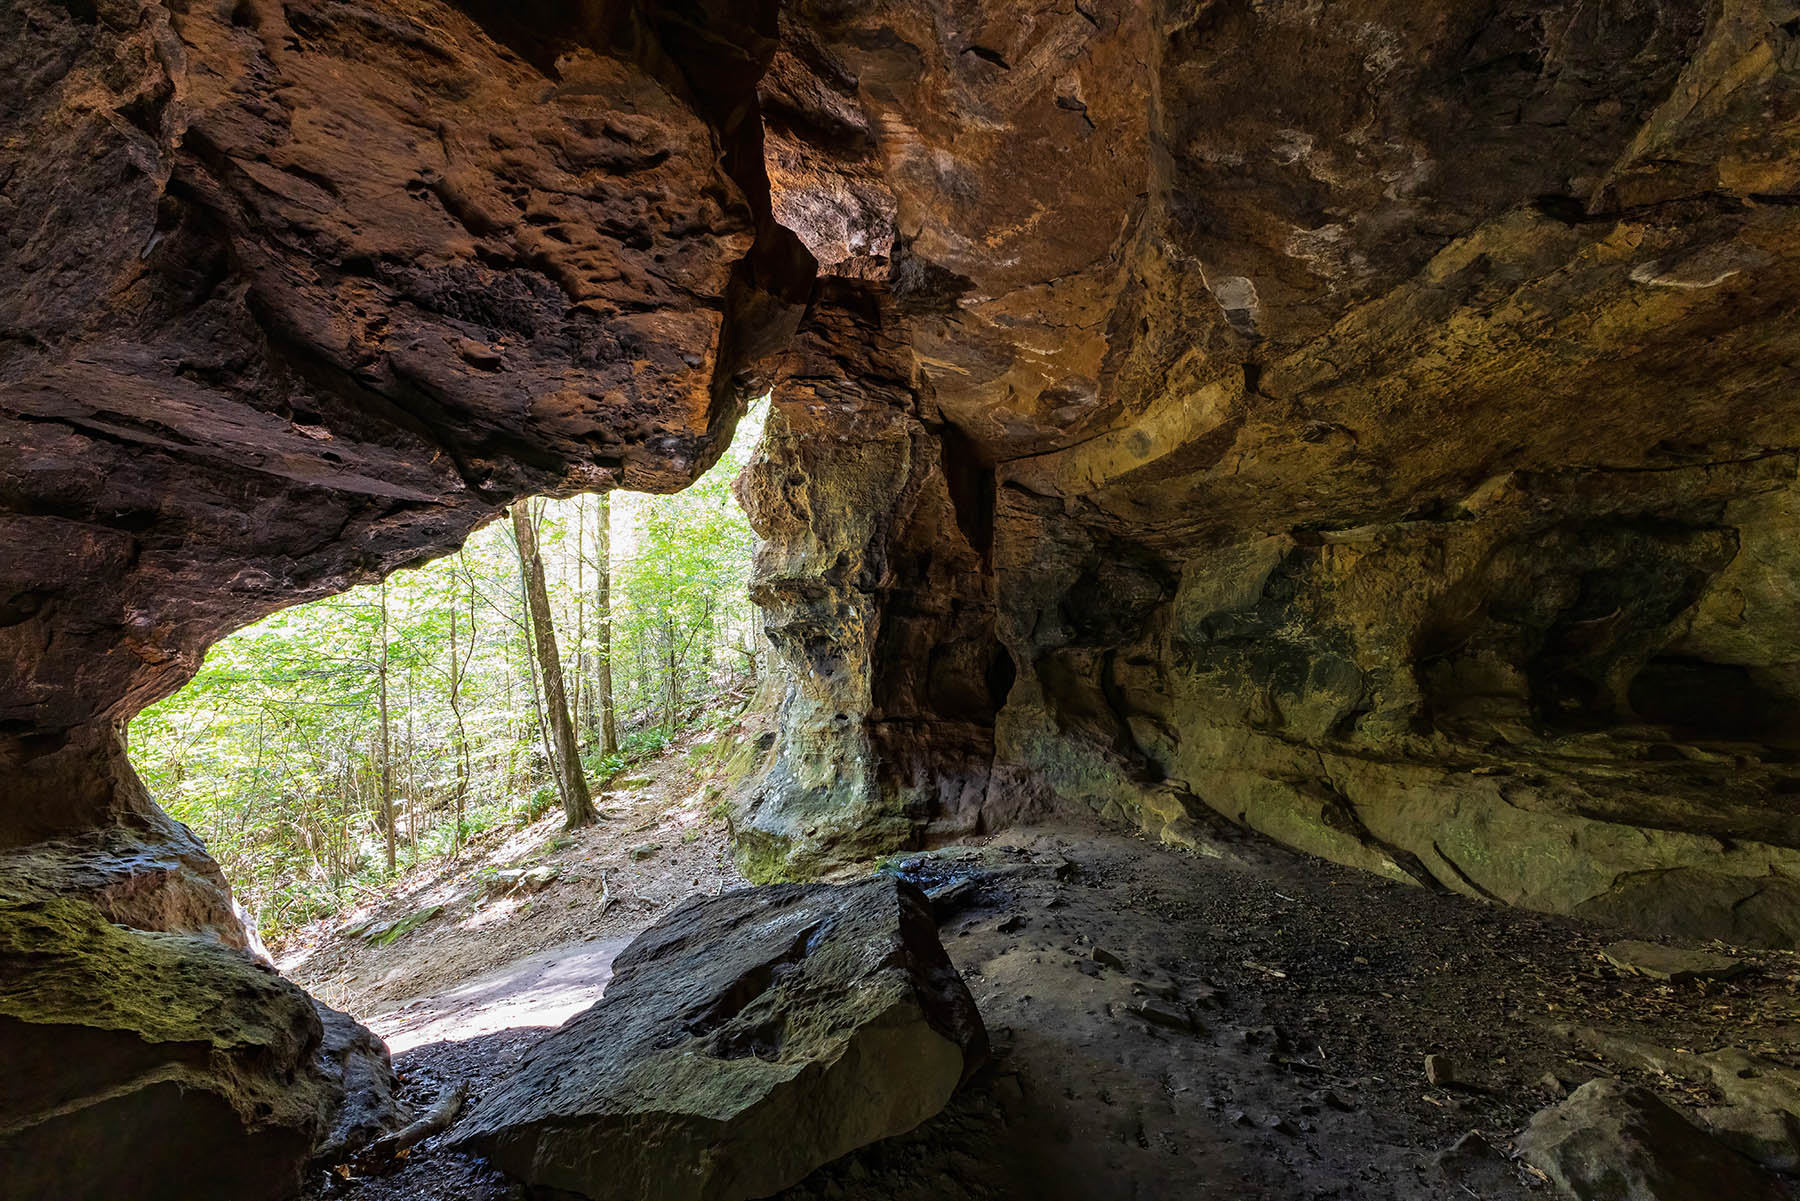 The Alum Cave Trail: A Step-by-Step Guide to Conquering the Climb